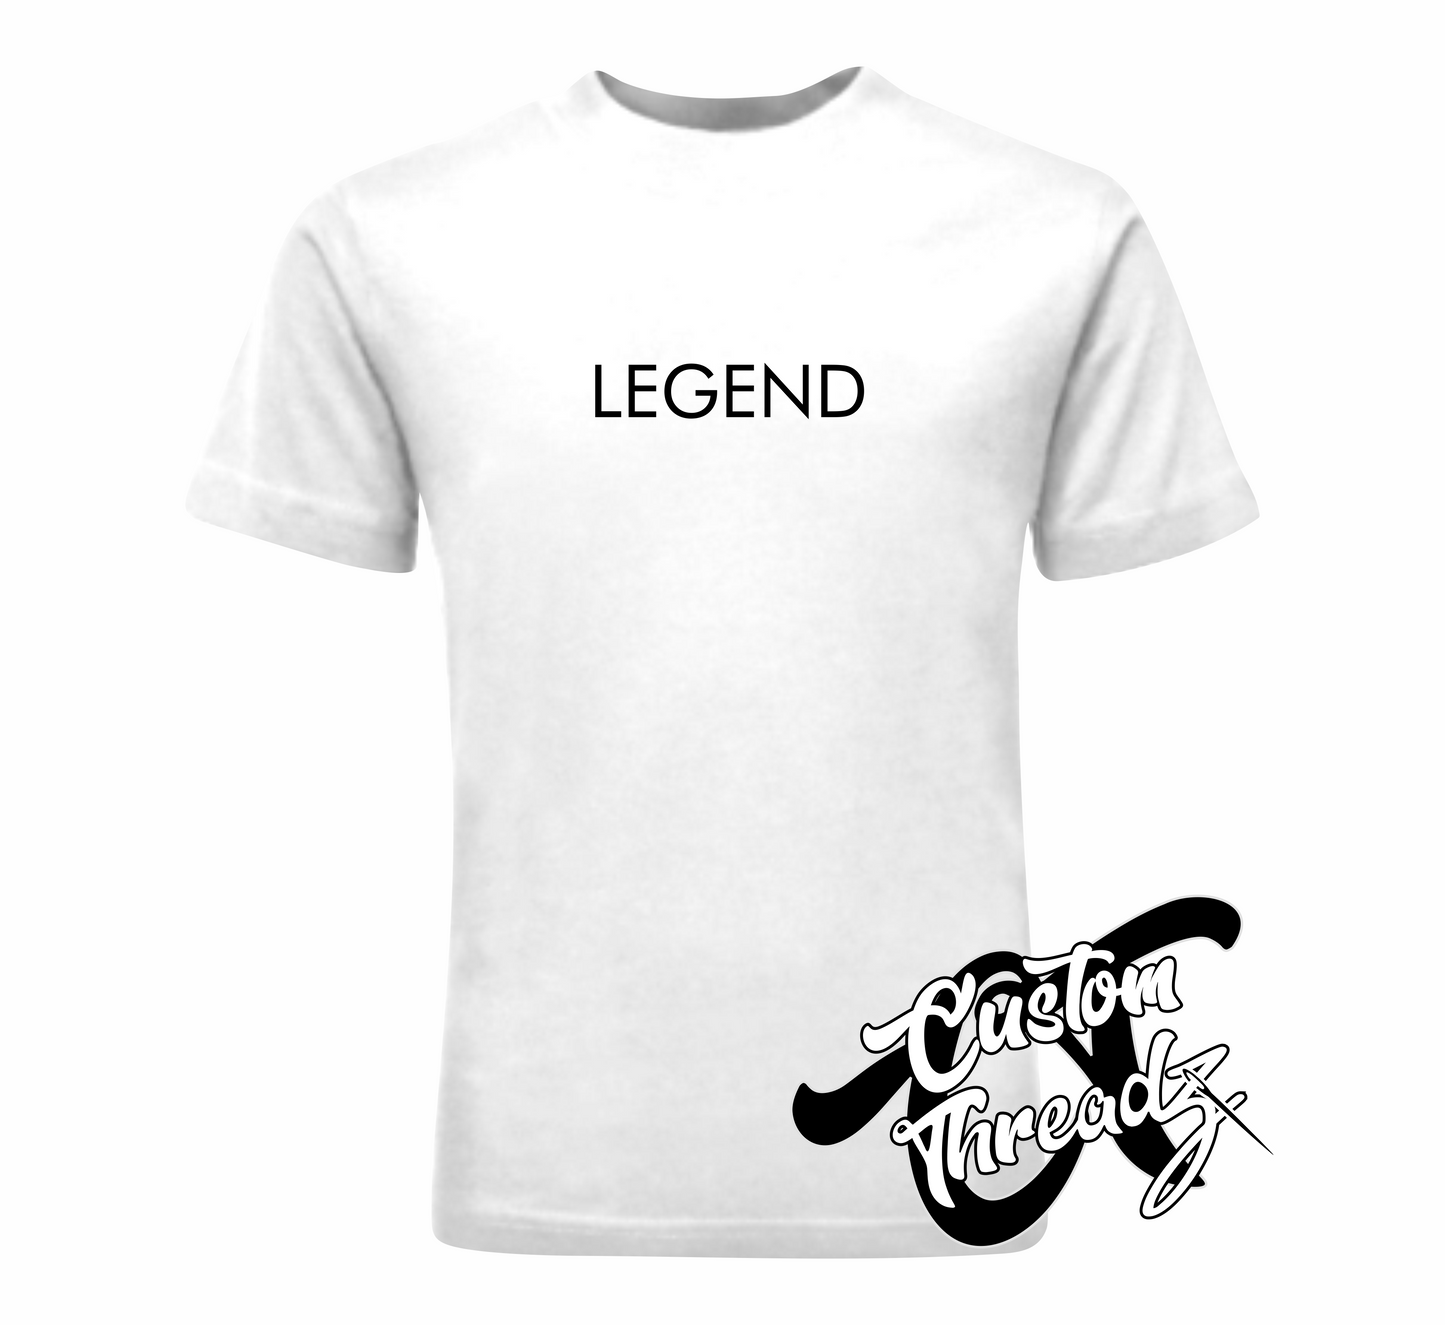 white tee with legend the infamous collection DTG printed design